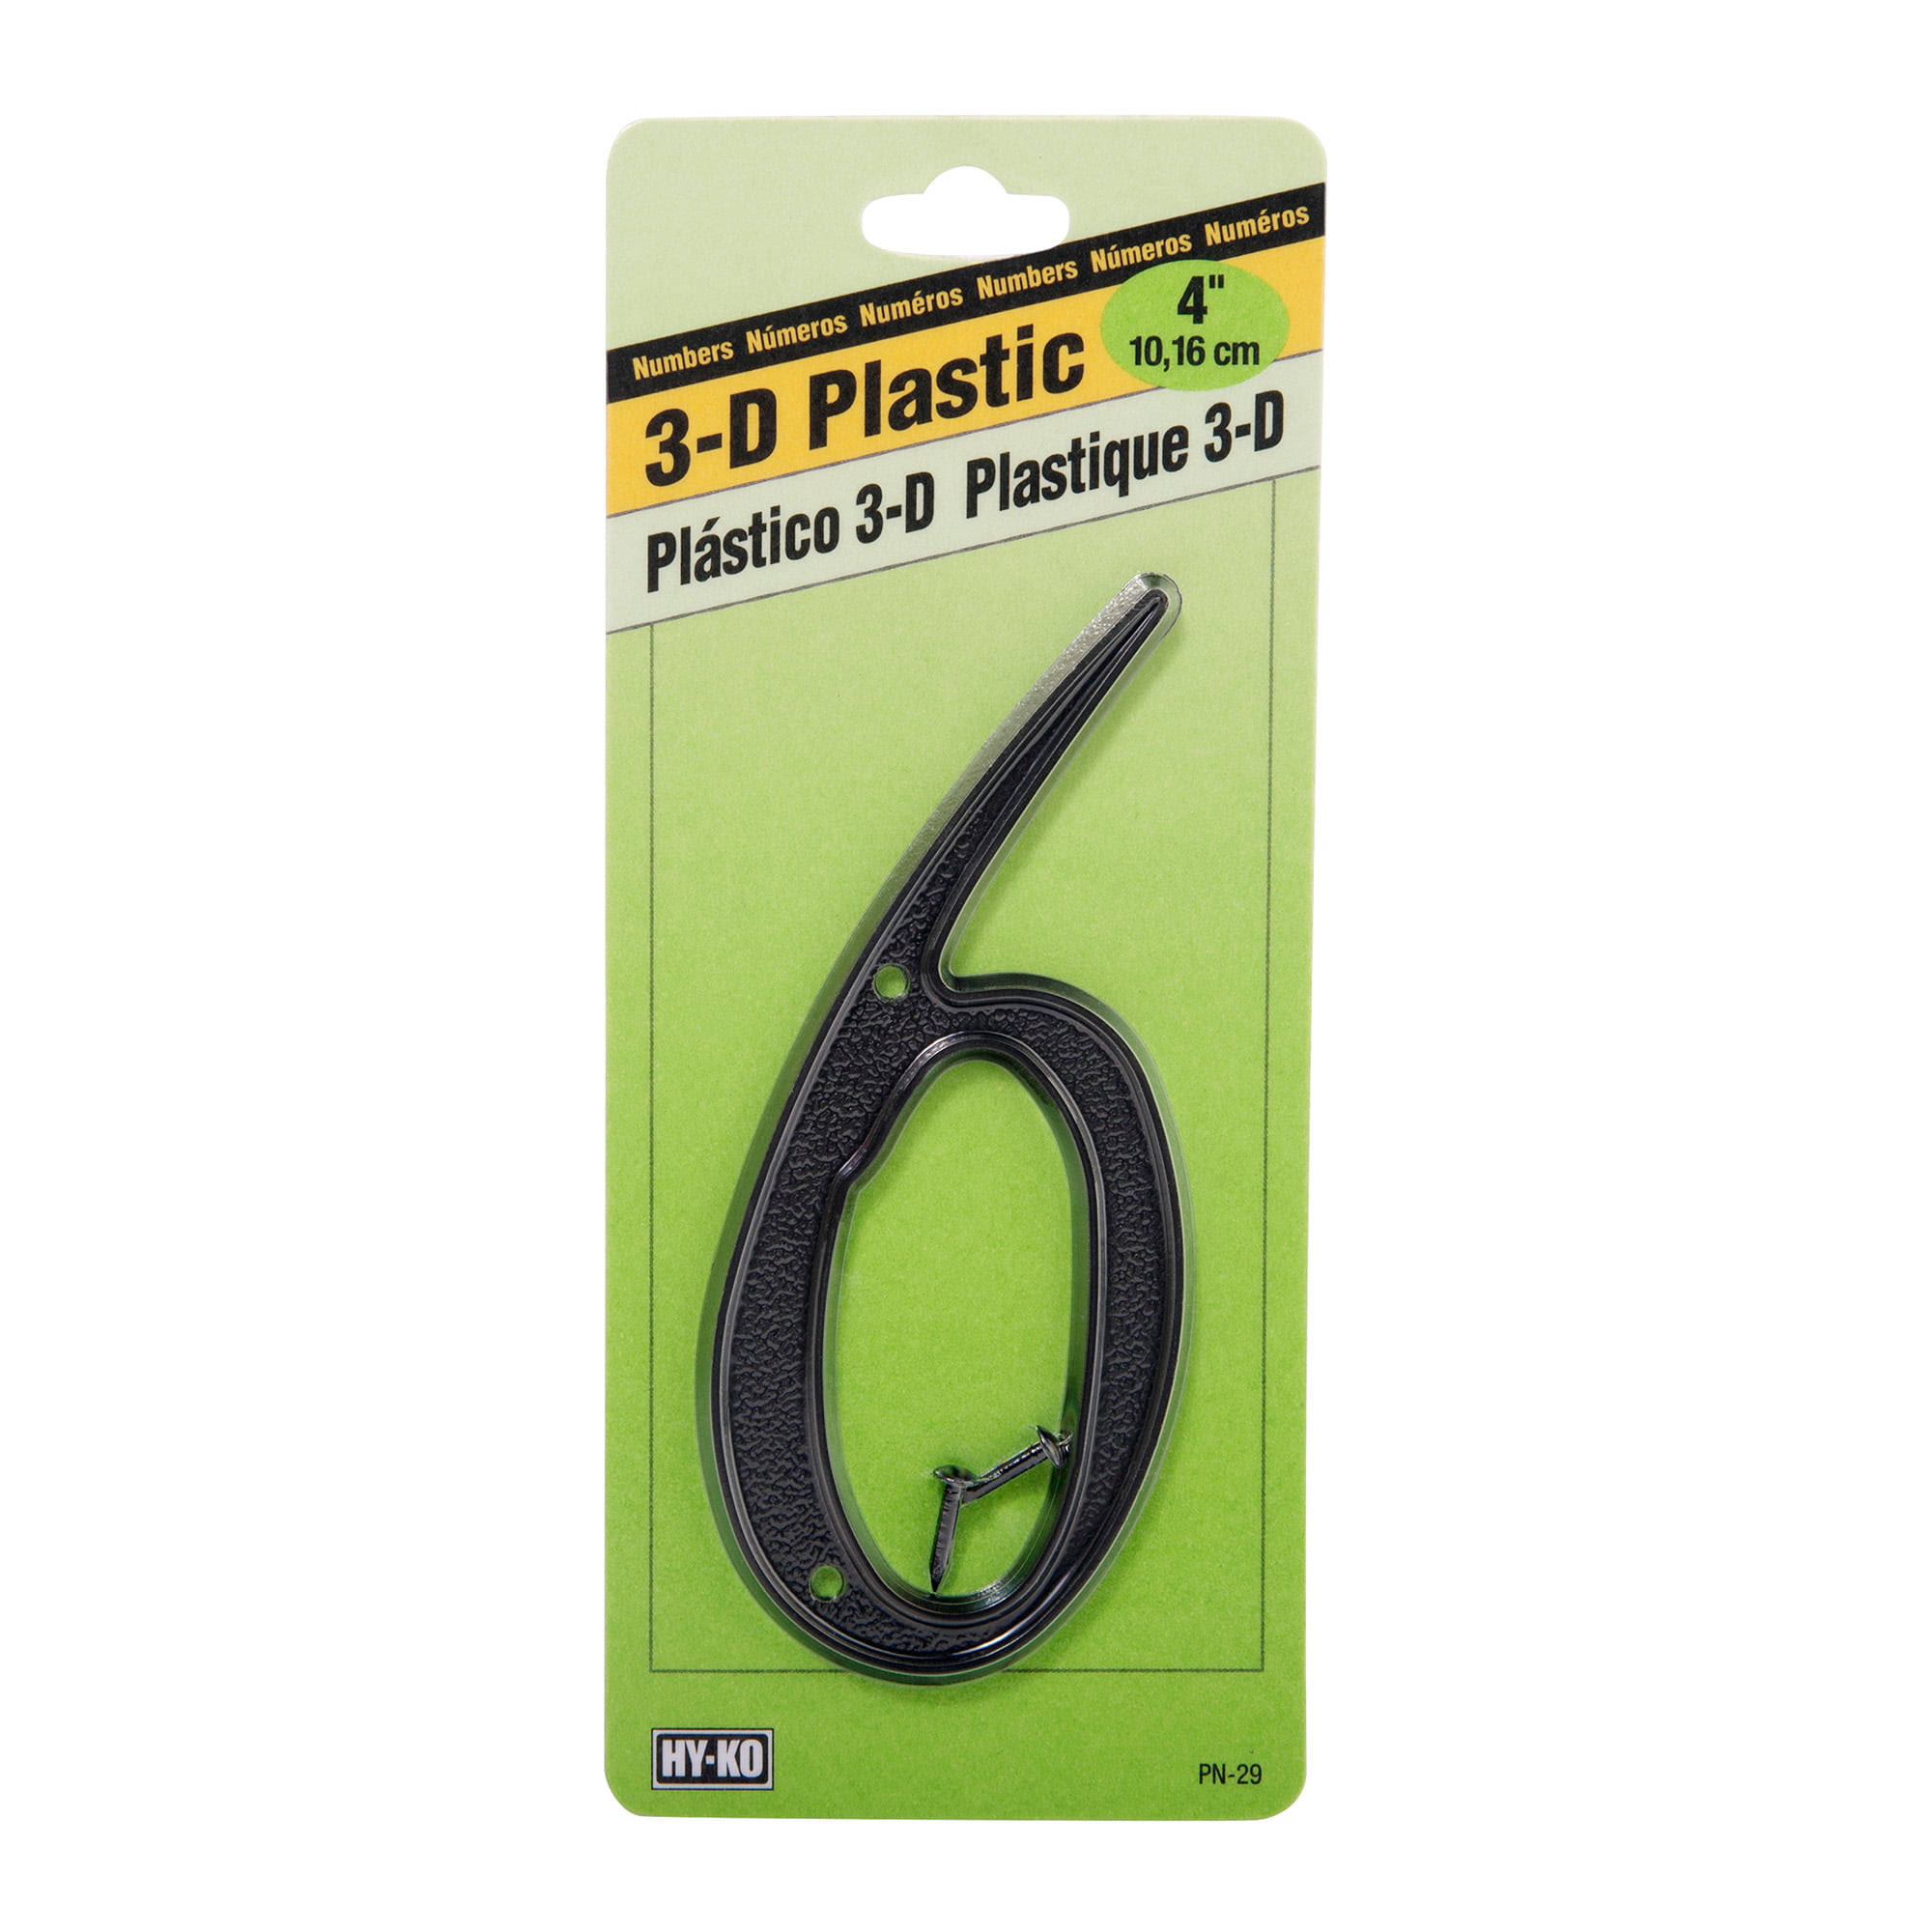 Hy-ko Products House Number 6 Plastic - 4", Black